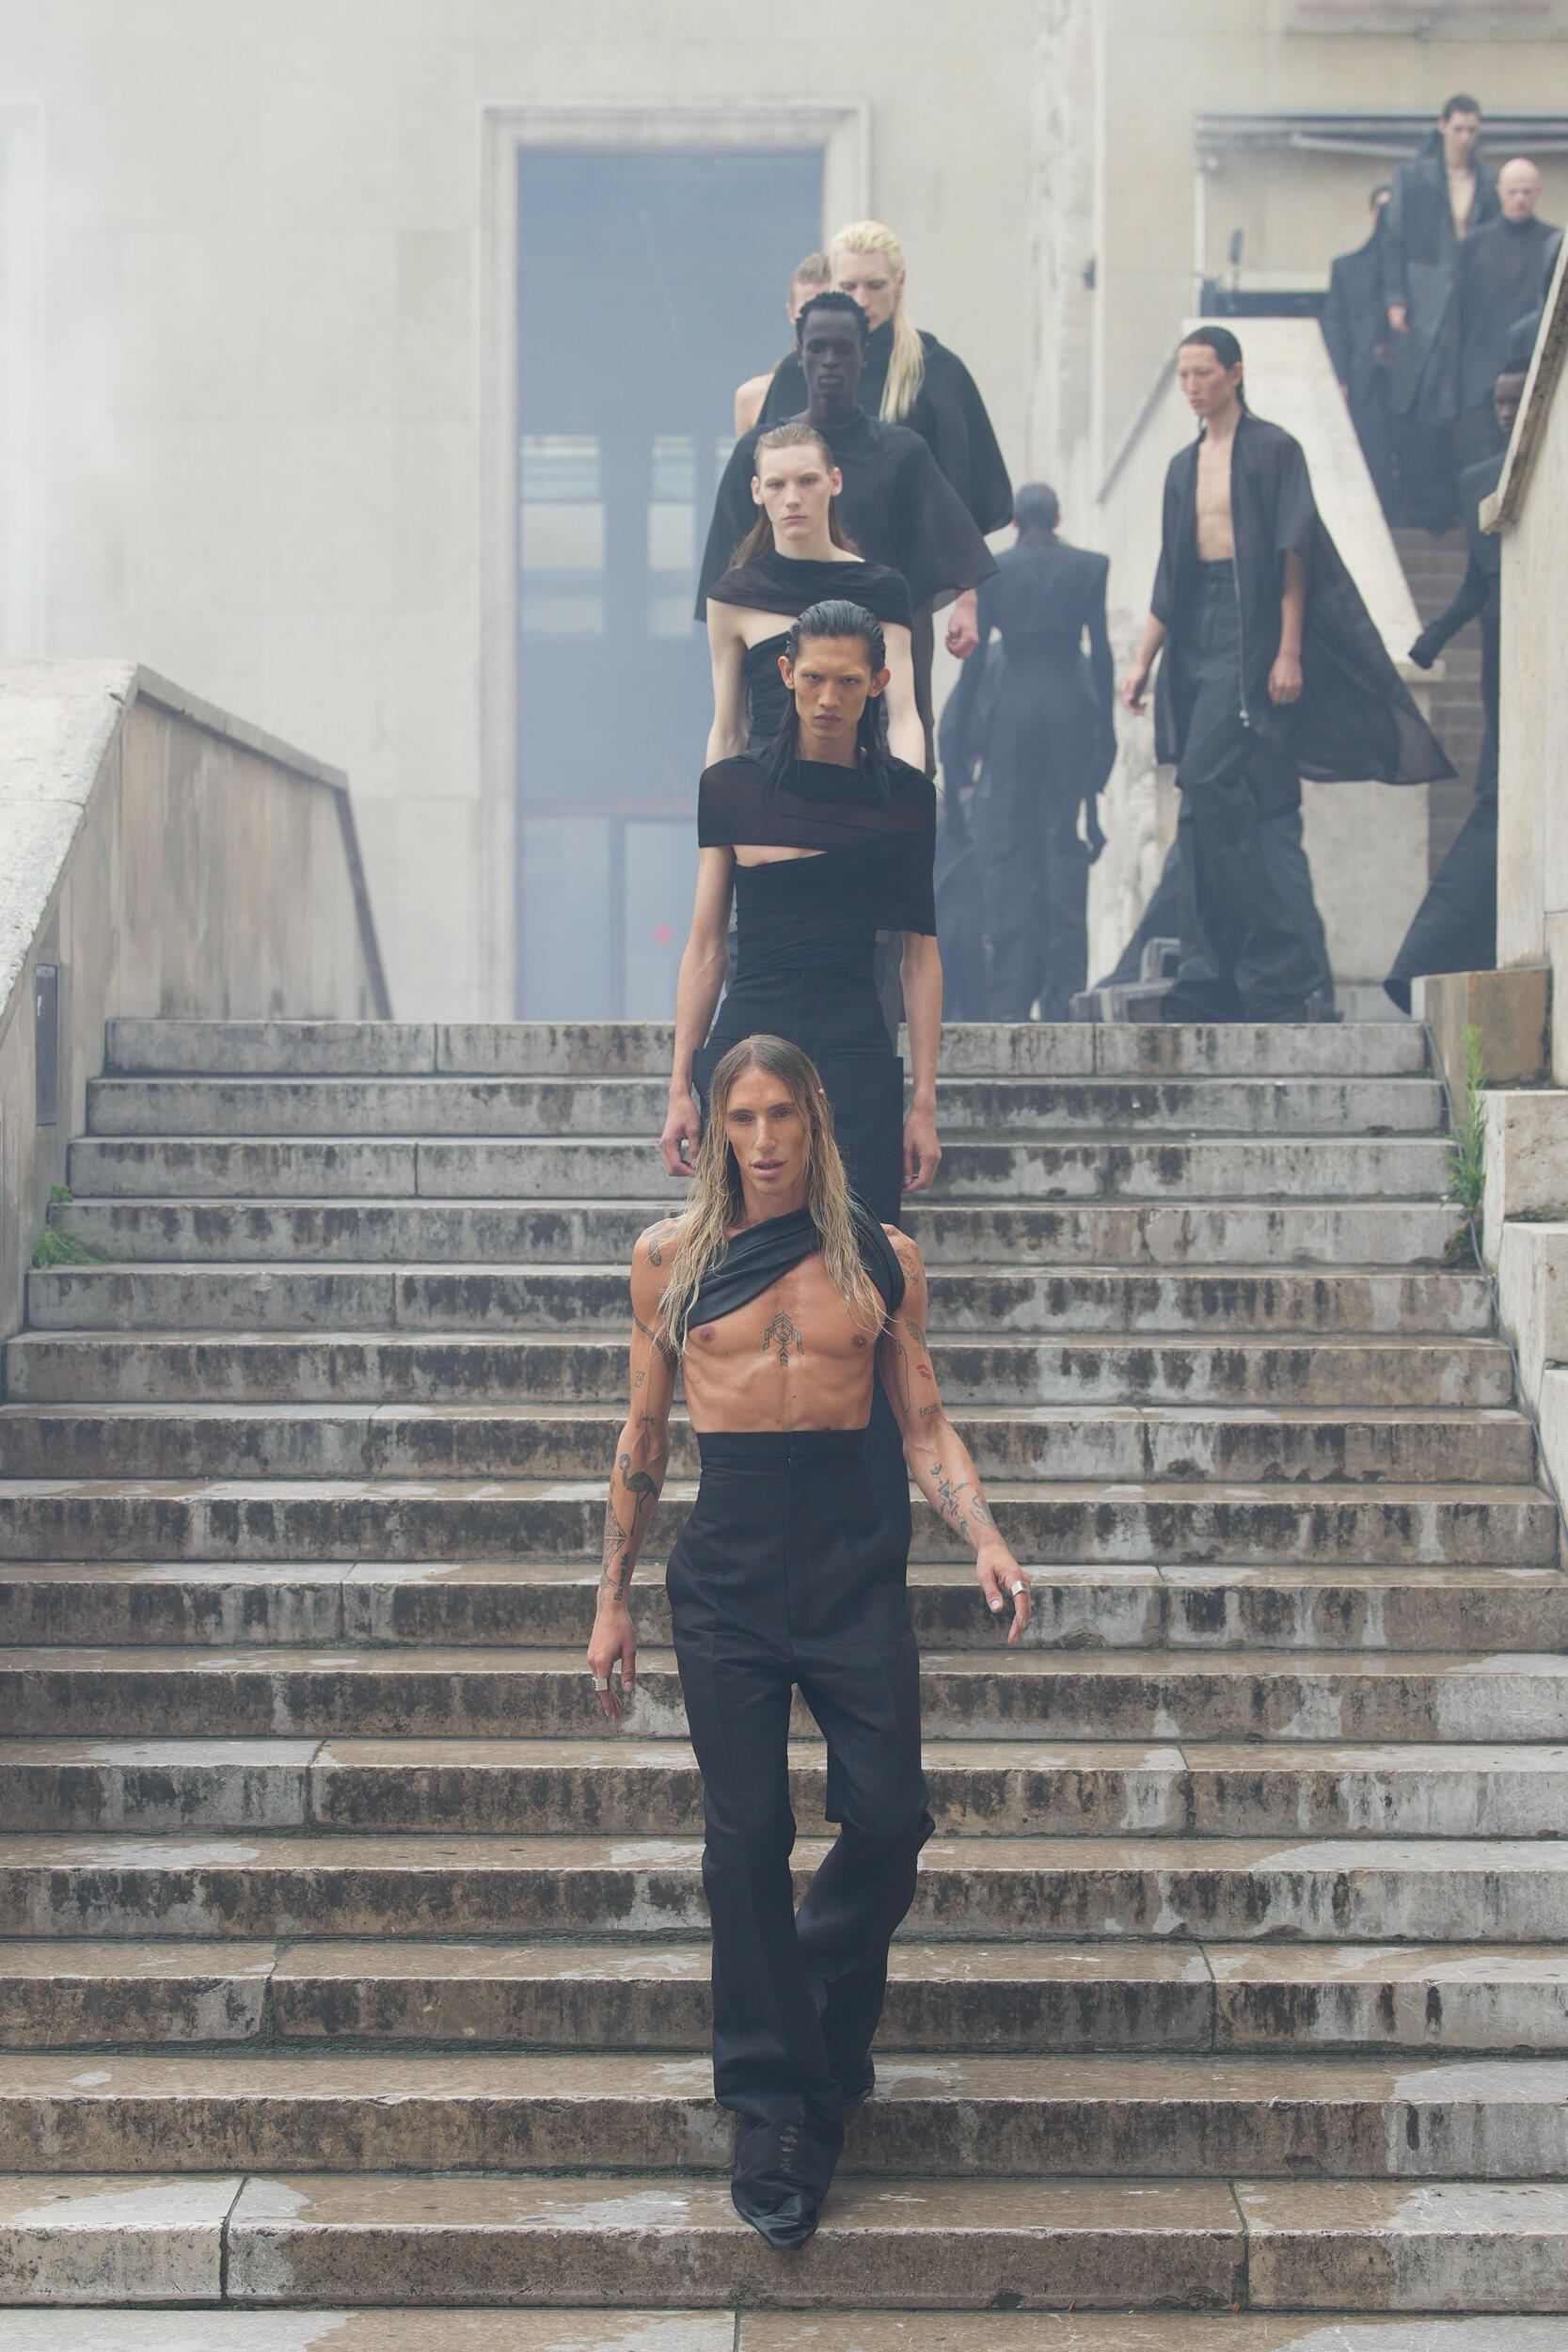 Haute couture or hot trash? A look at Rick Owens fashion line